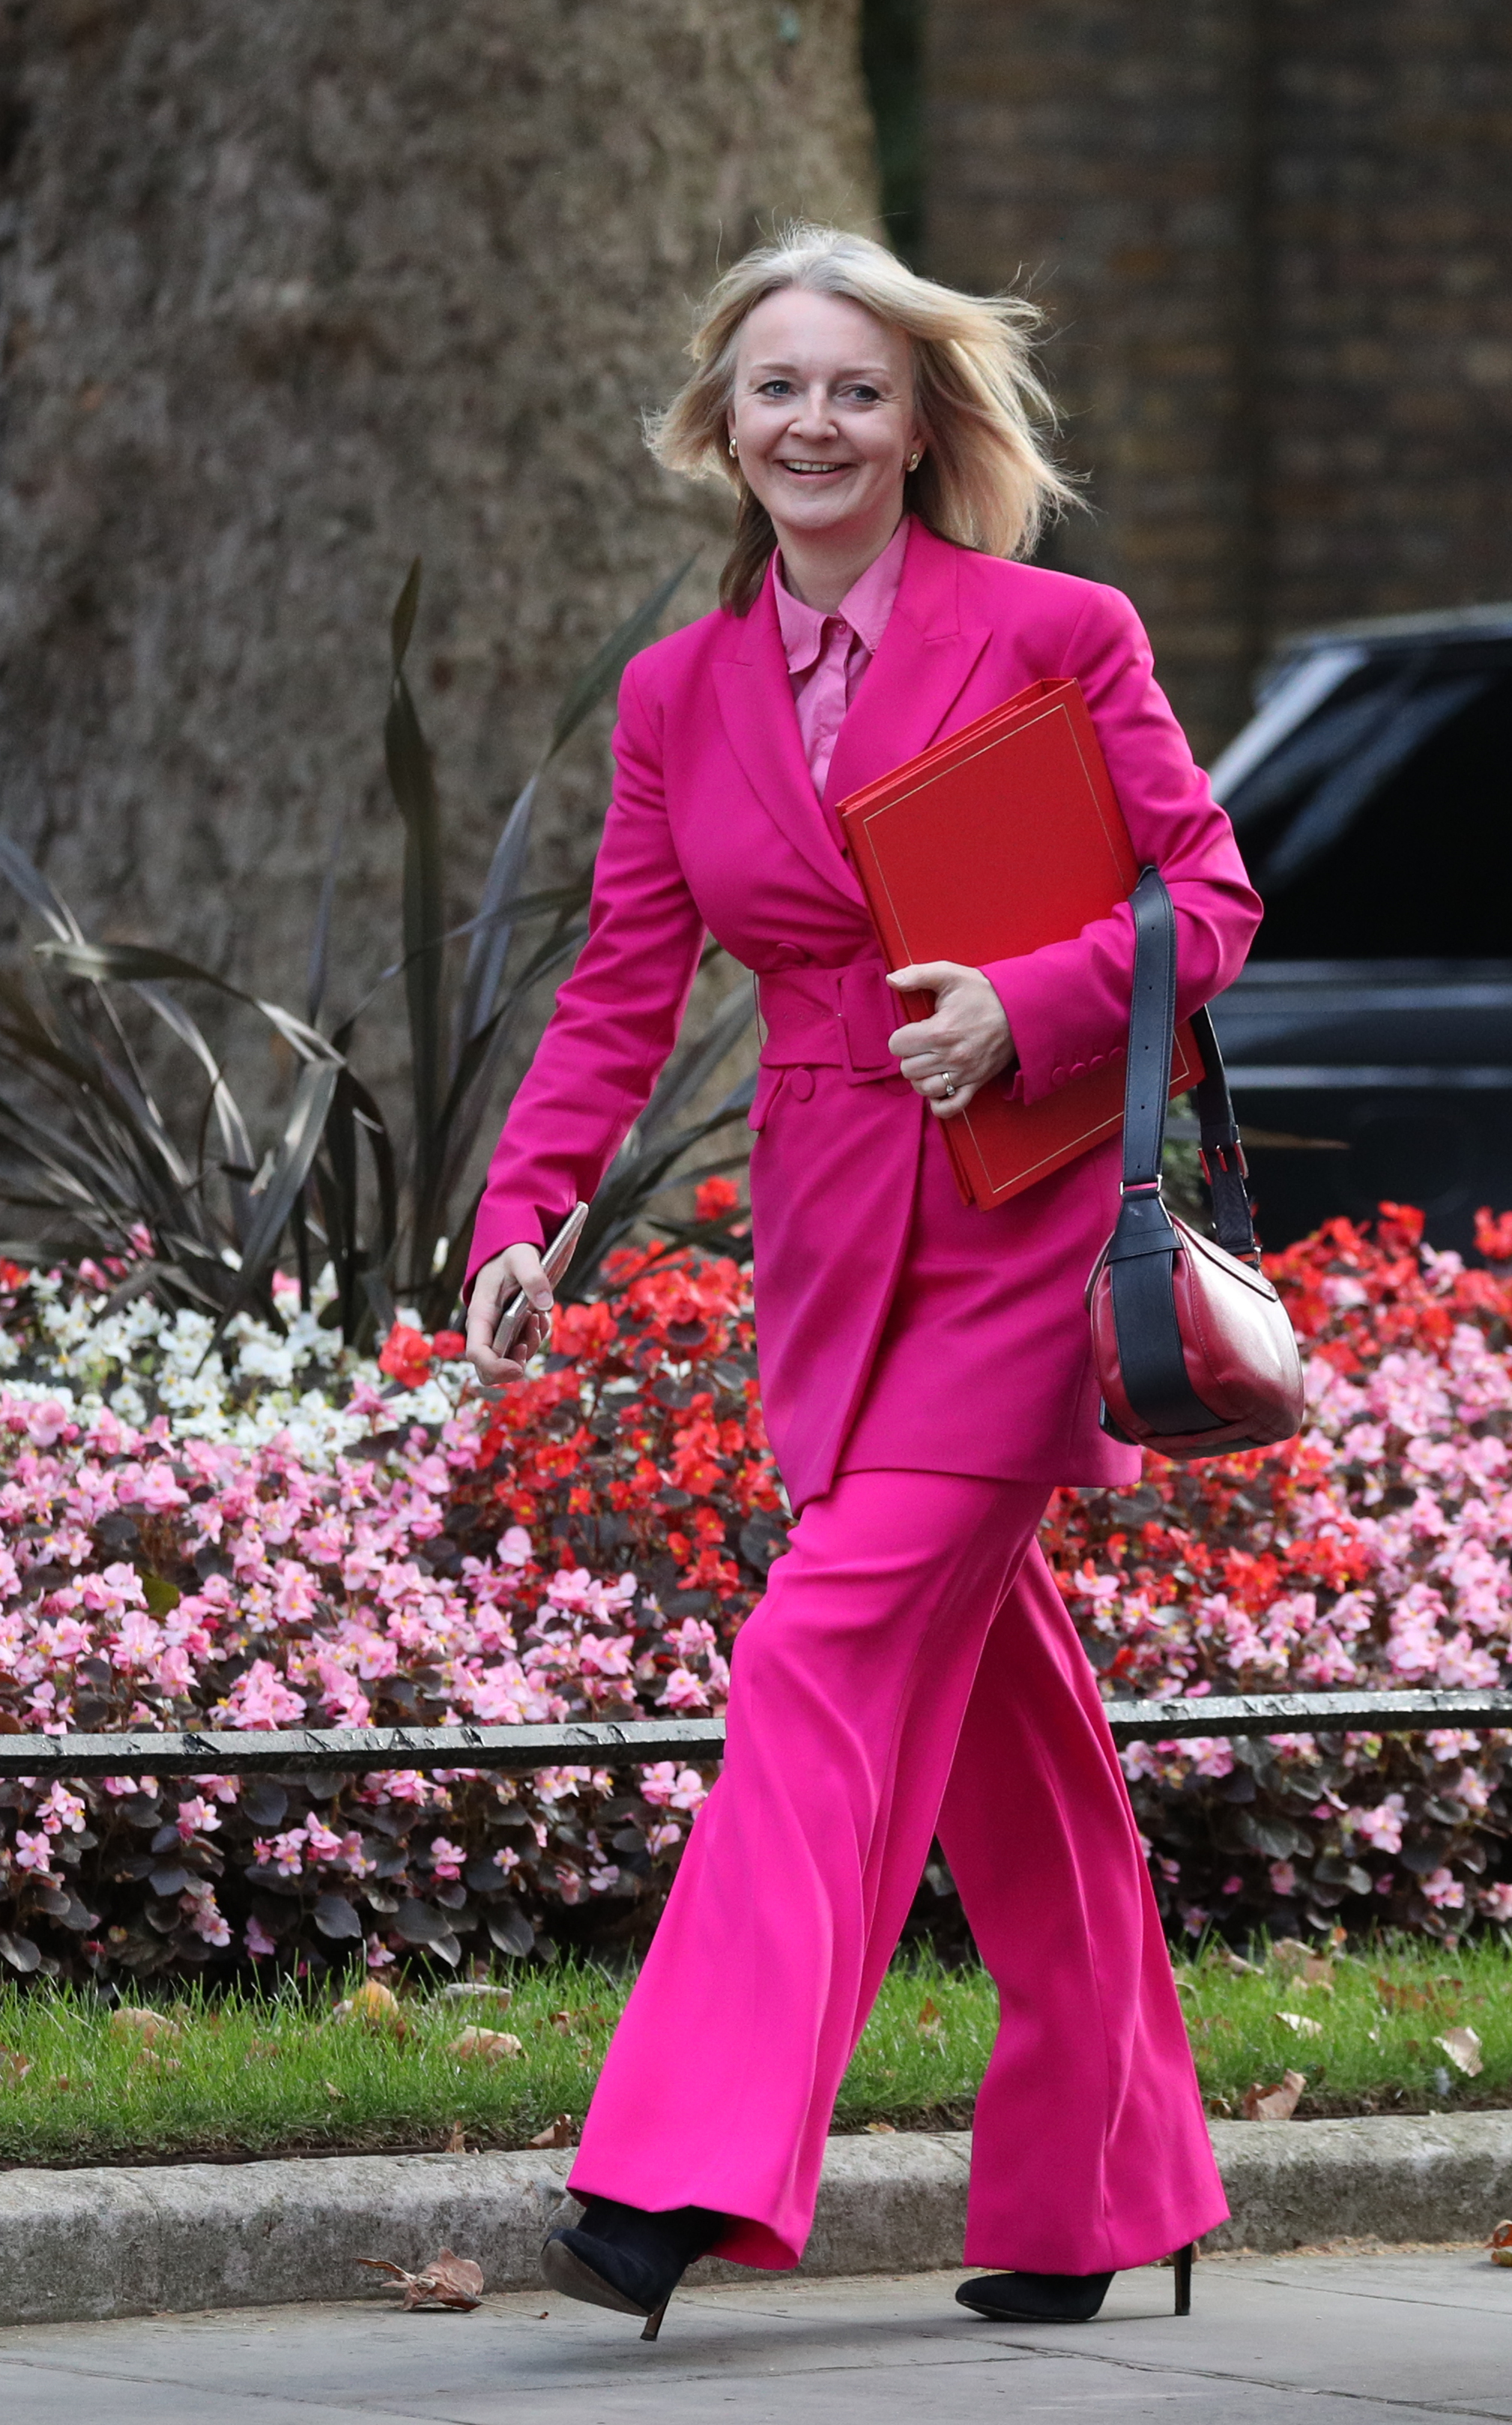 Then International Trade Secretary Liz Truss arrives for a cabinet meeting at 10 Downing Street, London, in 2019